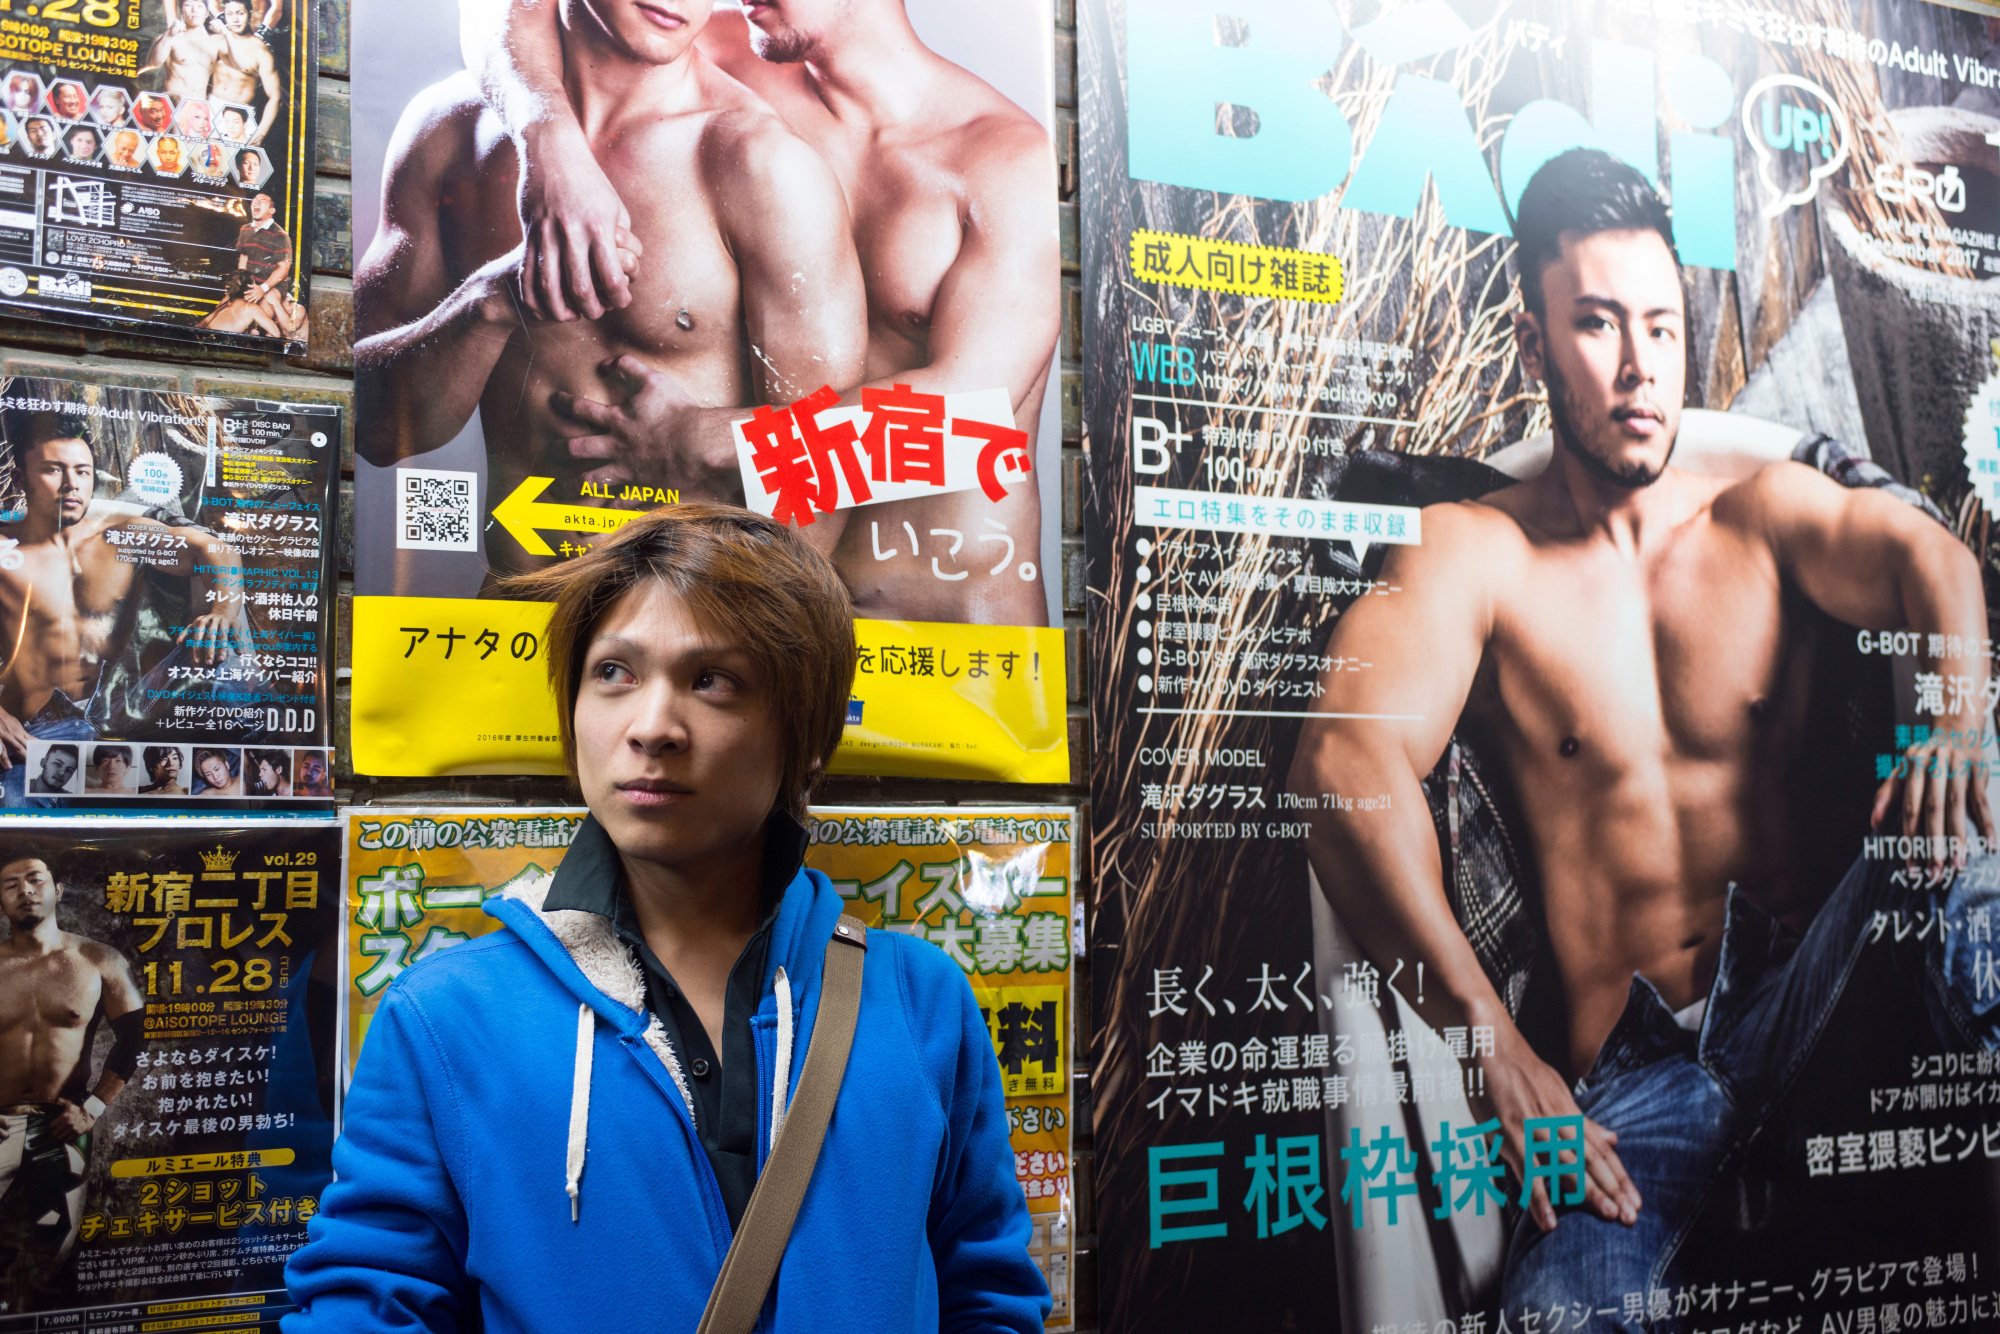 Boys for rent in Tokyo Sex, lies and vulnerable young lives photo